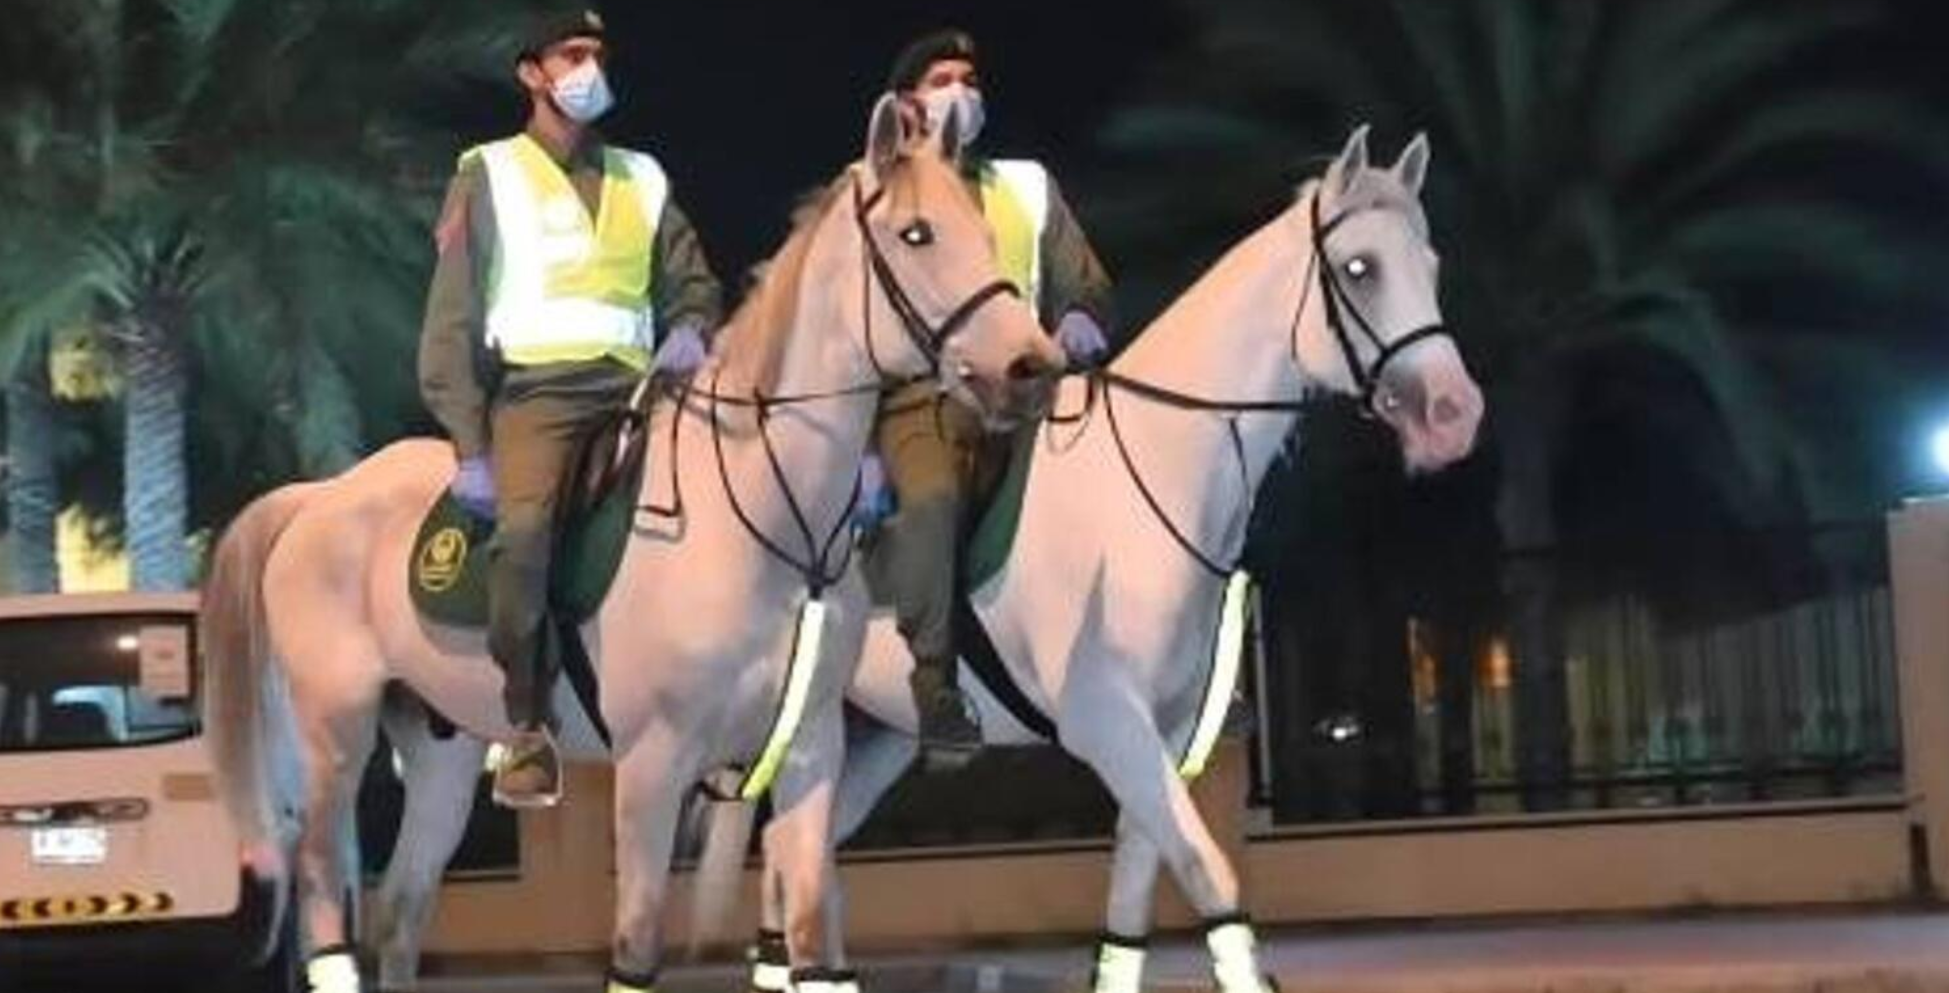 4G body cameras are used by Dubai Mounted Police